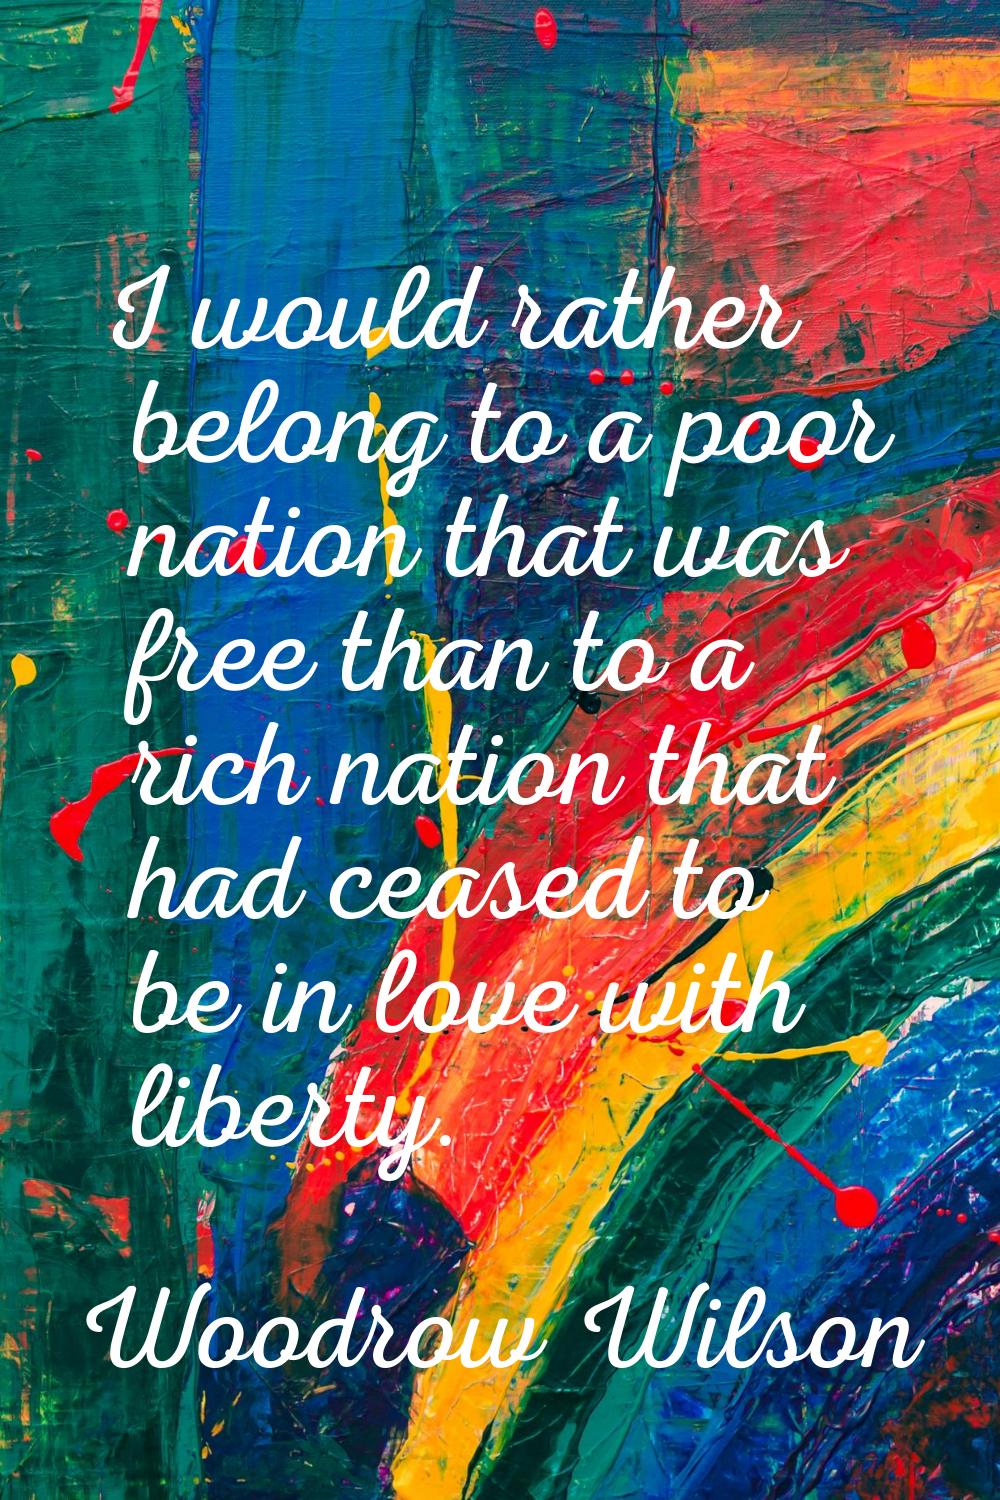 I would rather belong to a poor nation that was free than to a rich nation that had ceased to be in